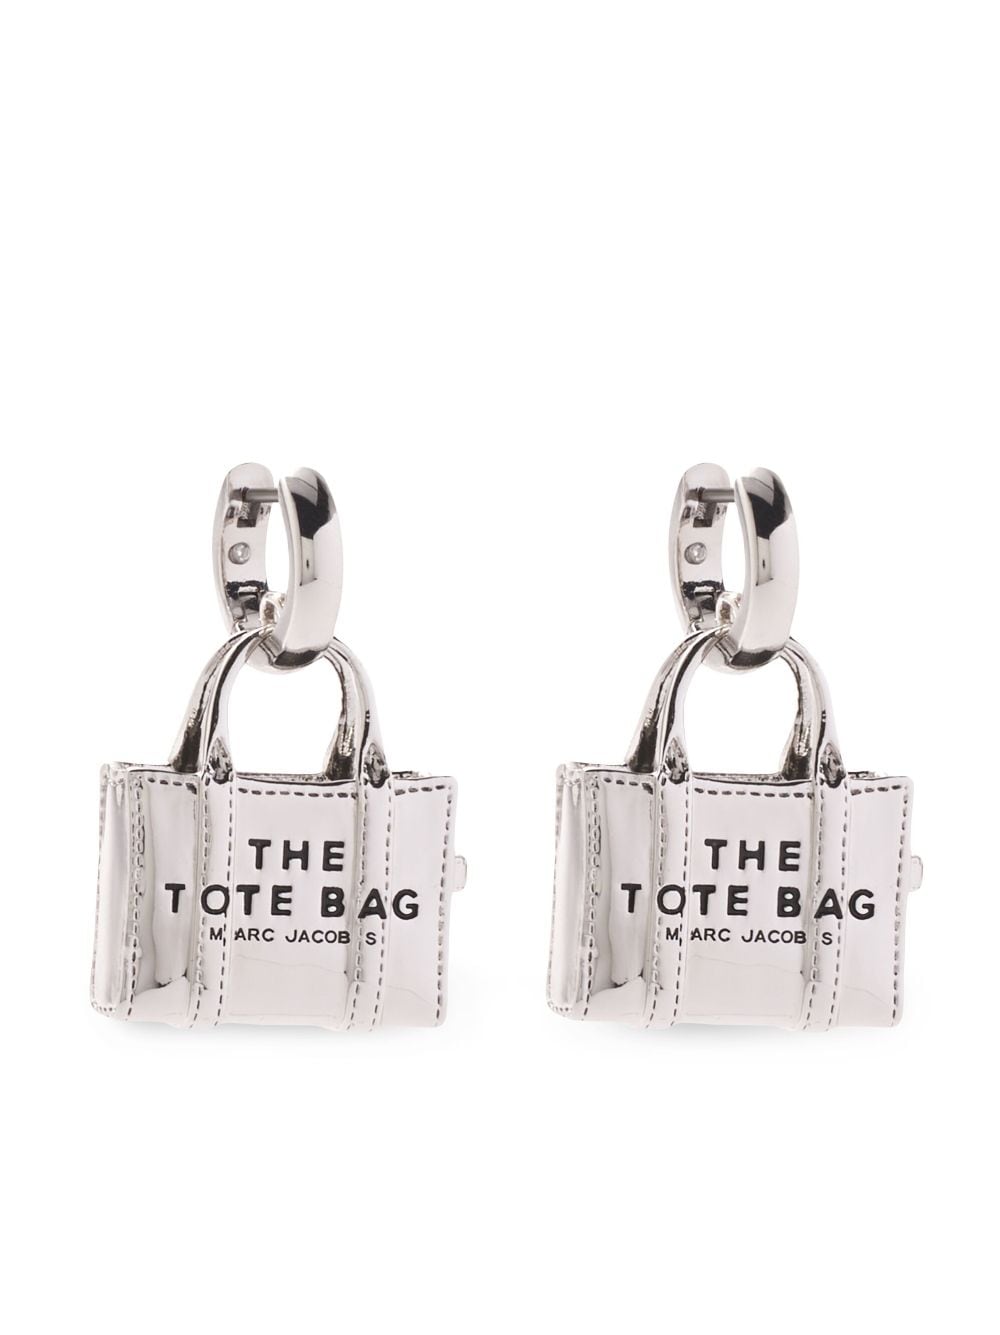 Image 1 of Marc Jacobs The Tote Bag earrings